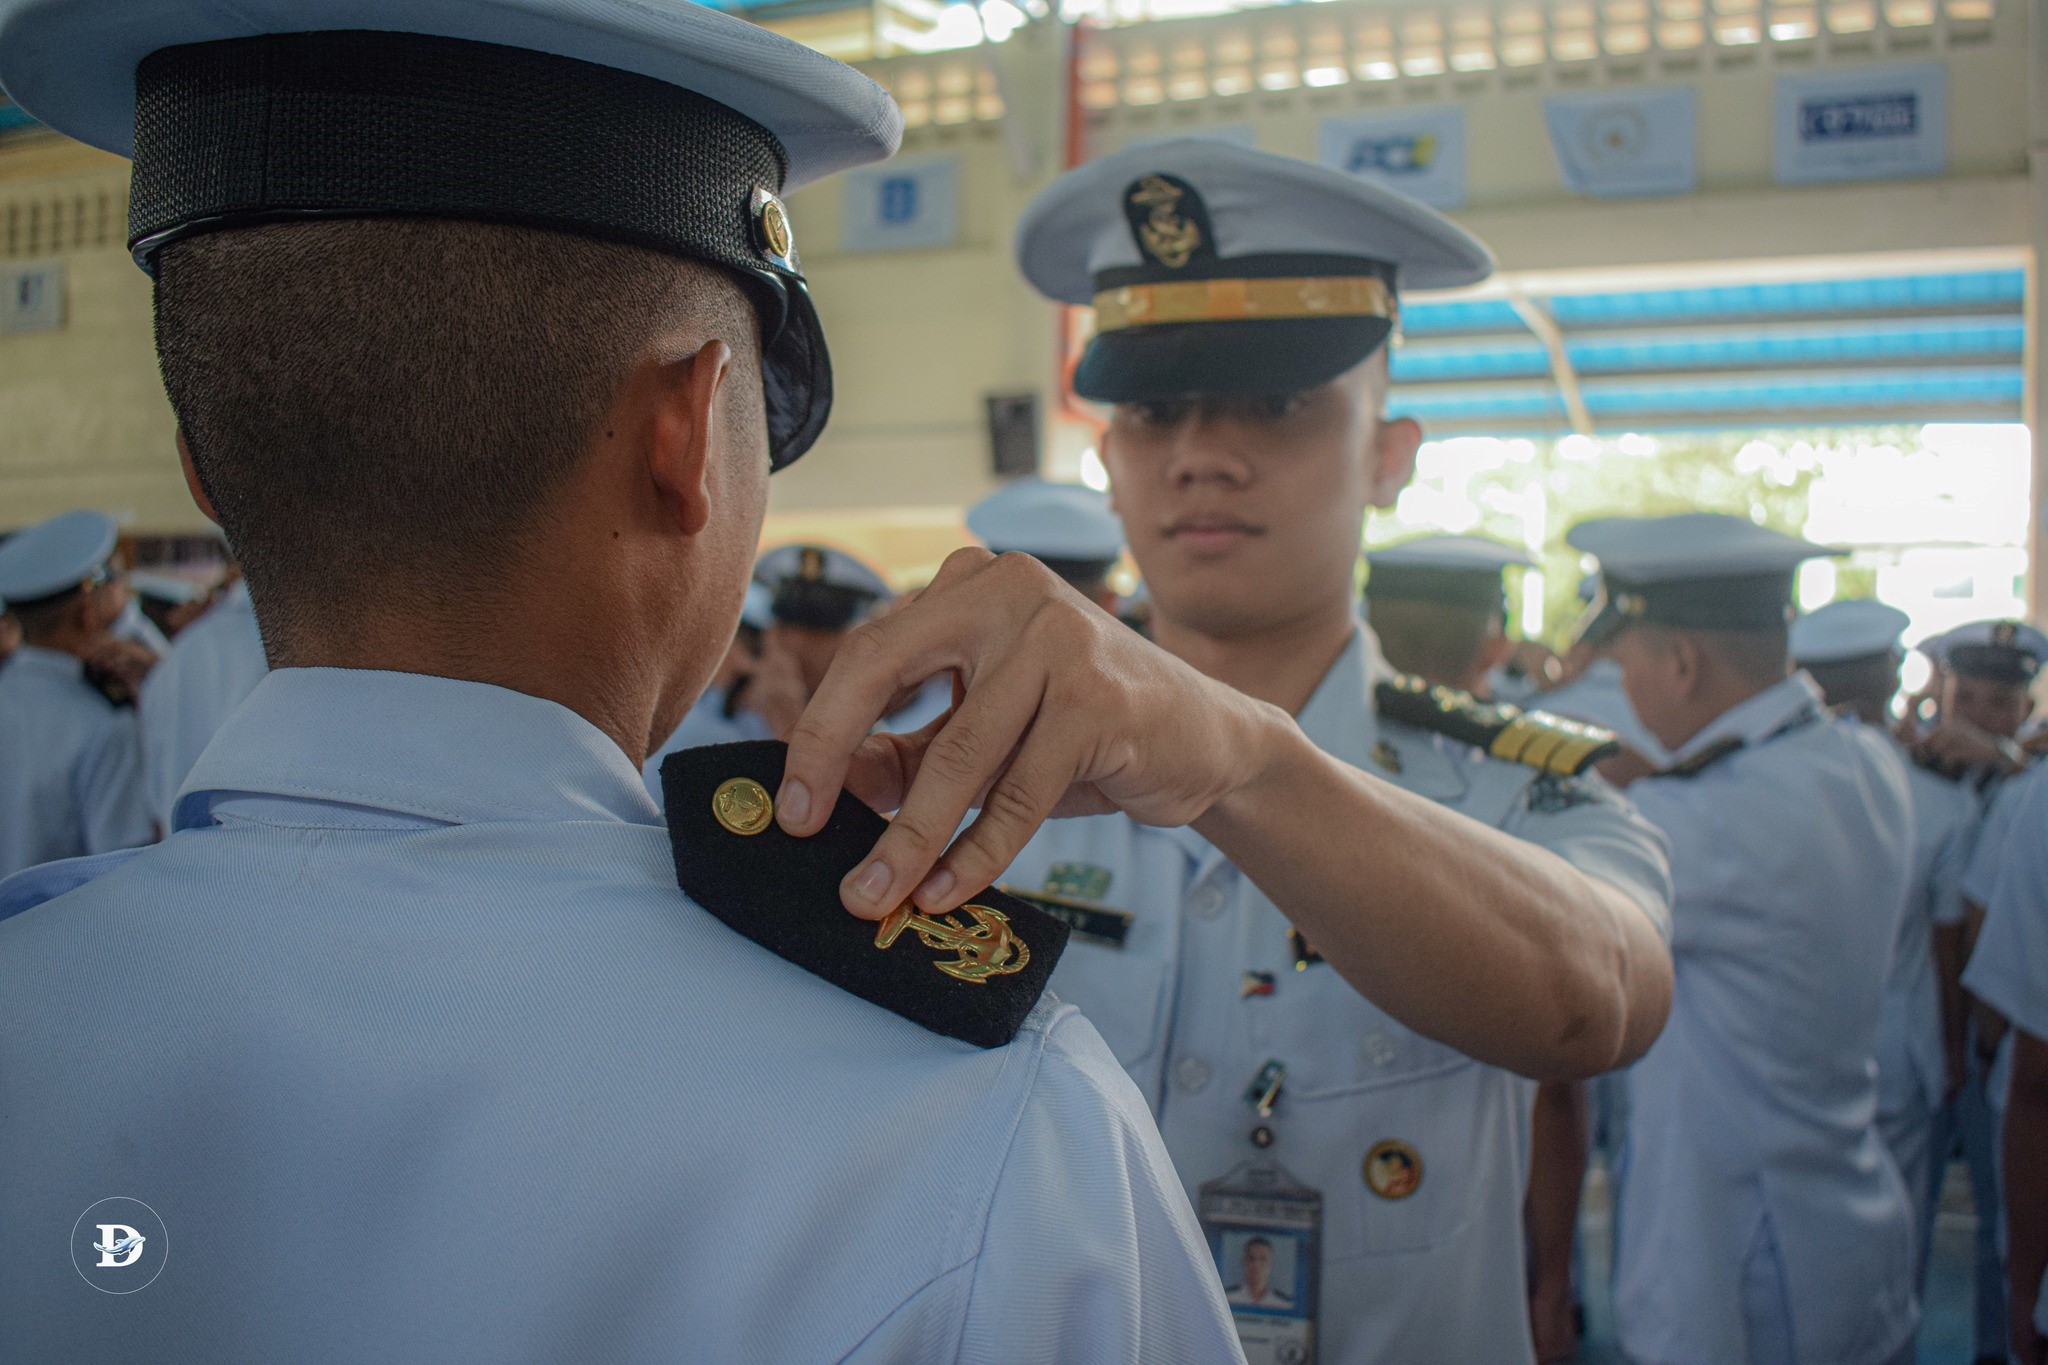 THE DONNING OF SHOULDER BOARD ACTIVITY